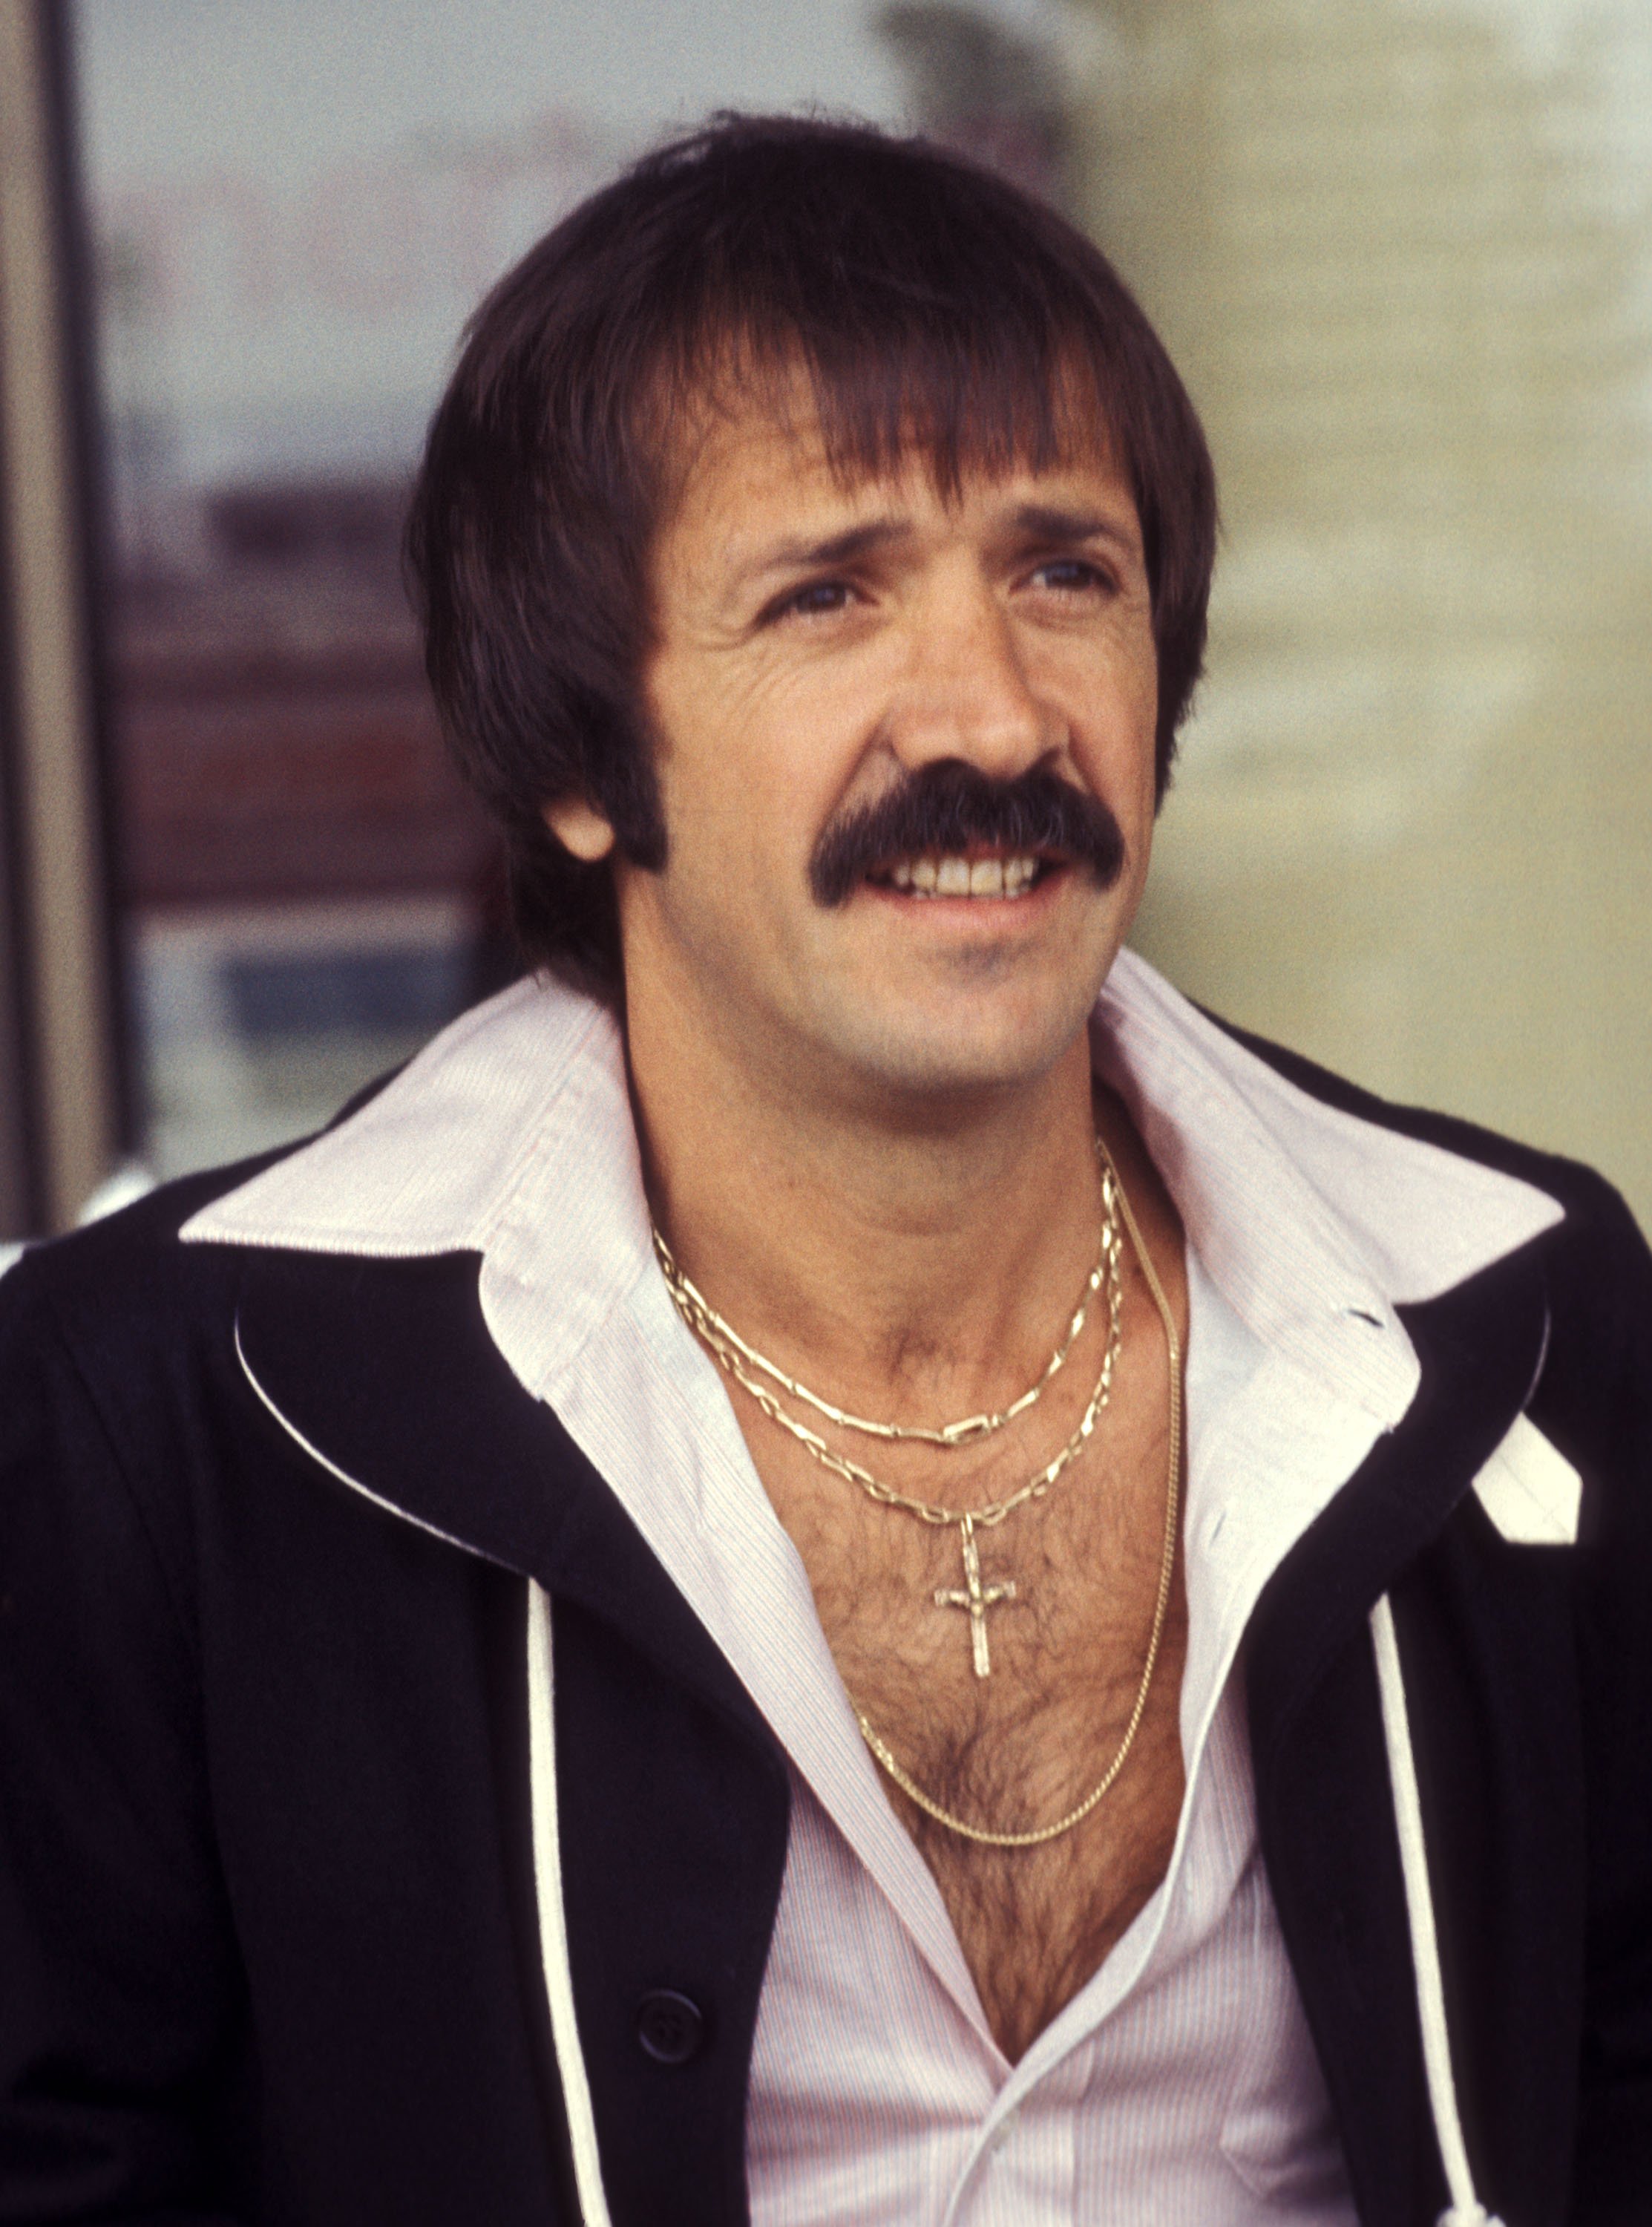 Singer Sonny Bono arrives at the Los Angeles International Airport on June 12, 1977 in Los Angeles, California | Photo: Getty Images